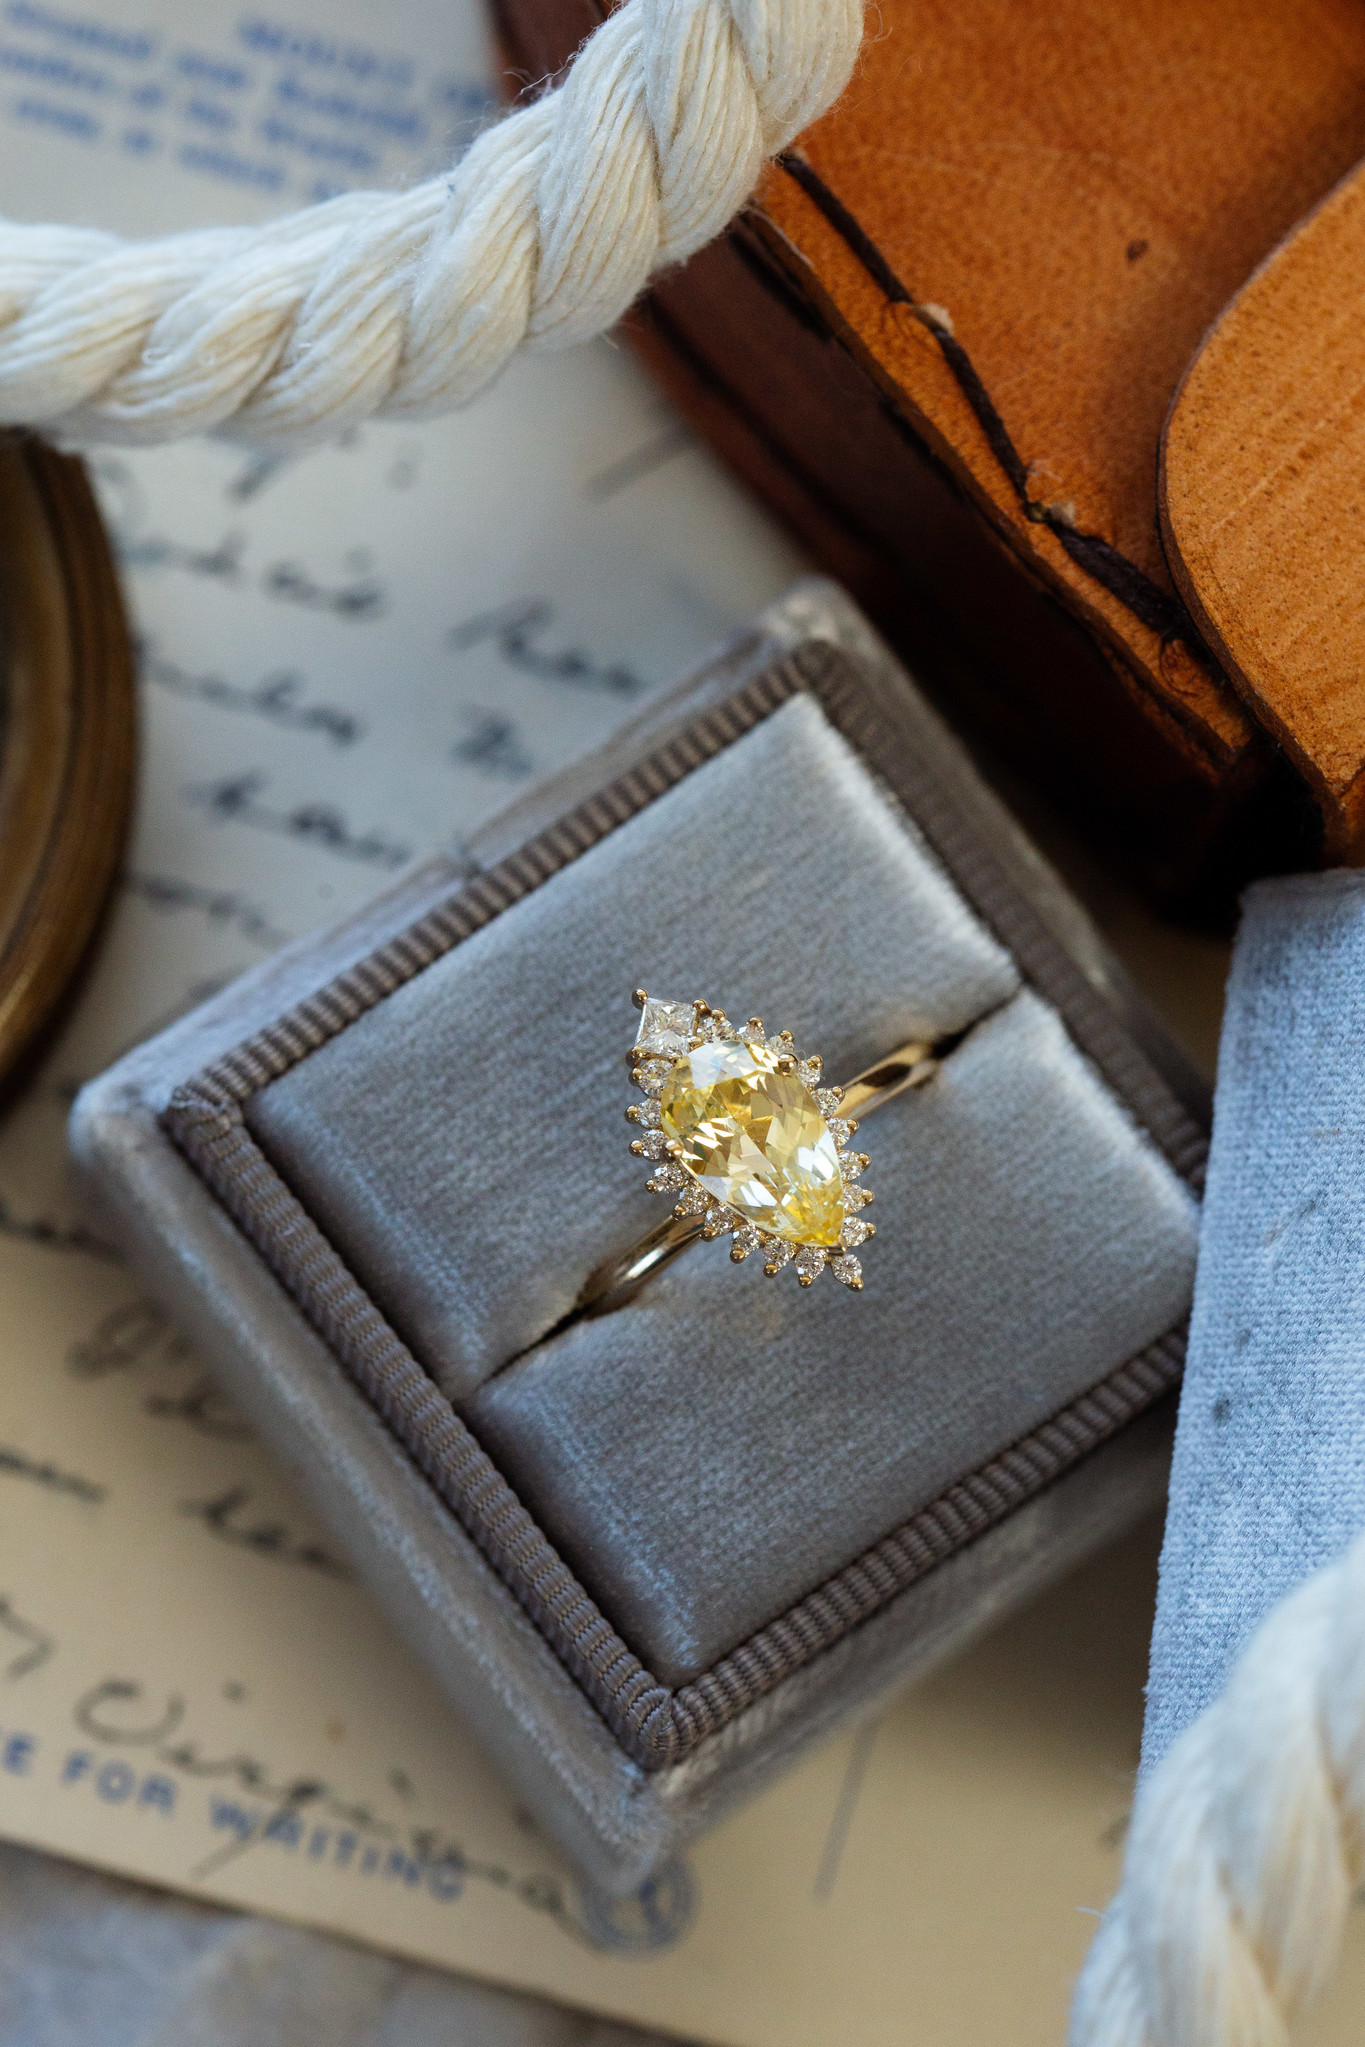 pale yellow sapphire engagement ring